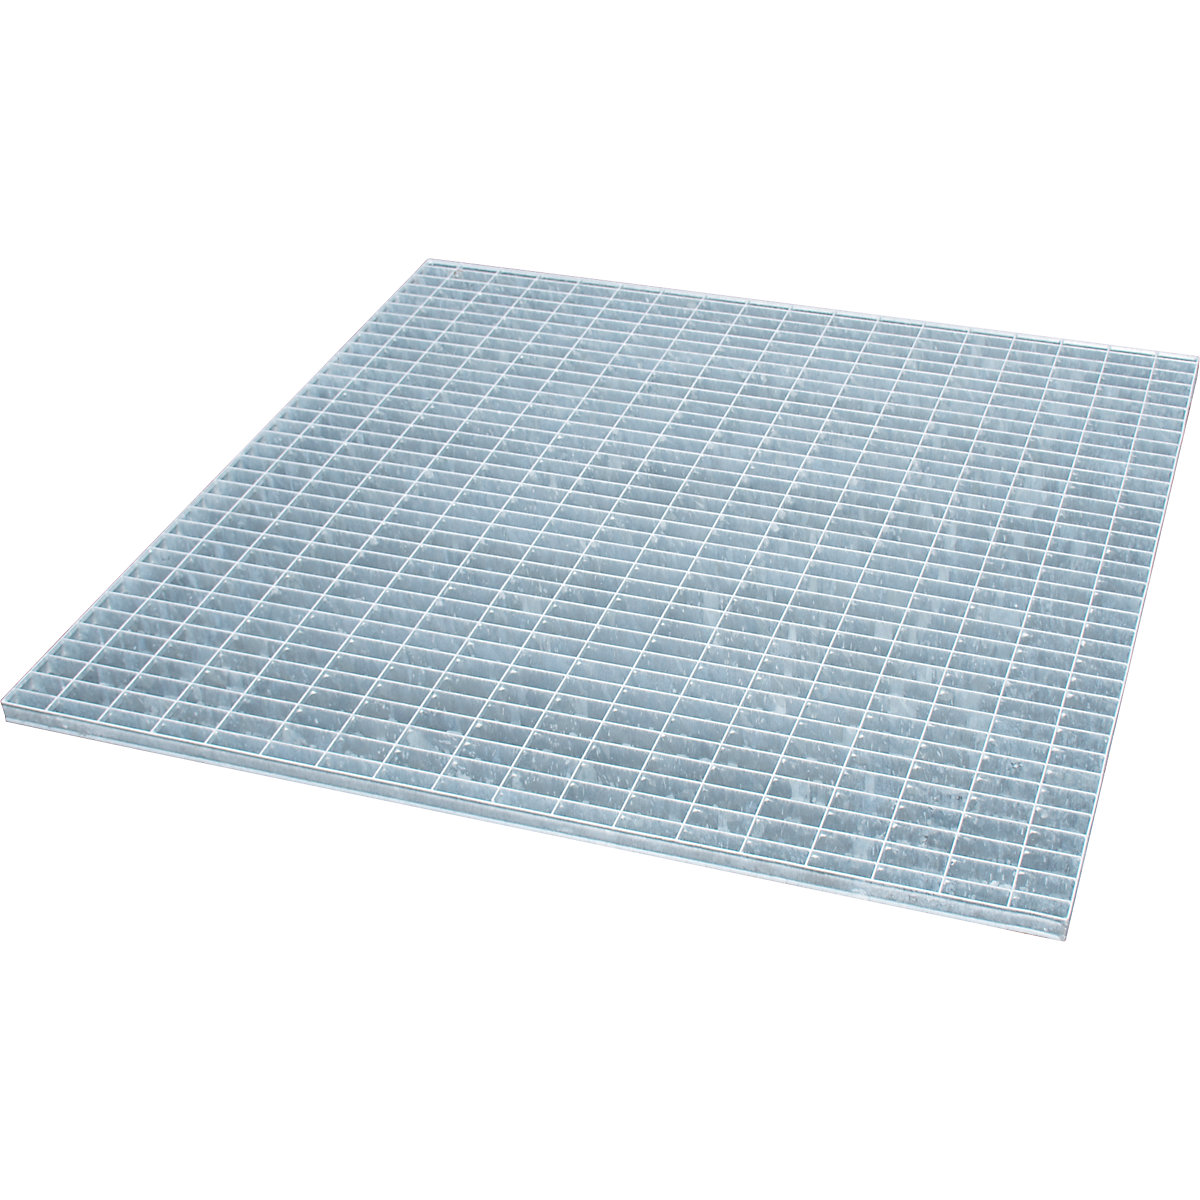 Grate – eurokraft pro, for sump trays for 200 l drums, zinc plated, LxWxH 1200 x 1200 x 285 mm-4